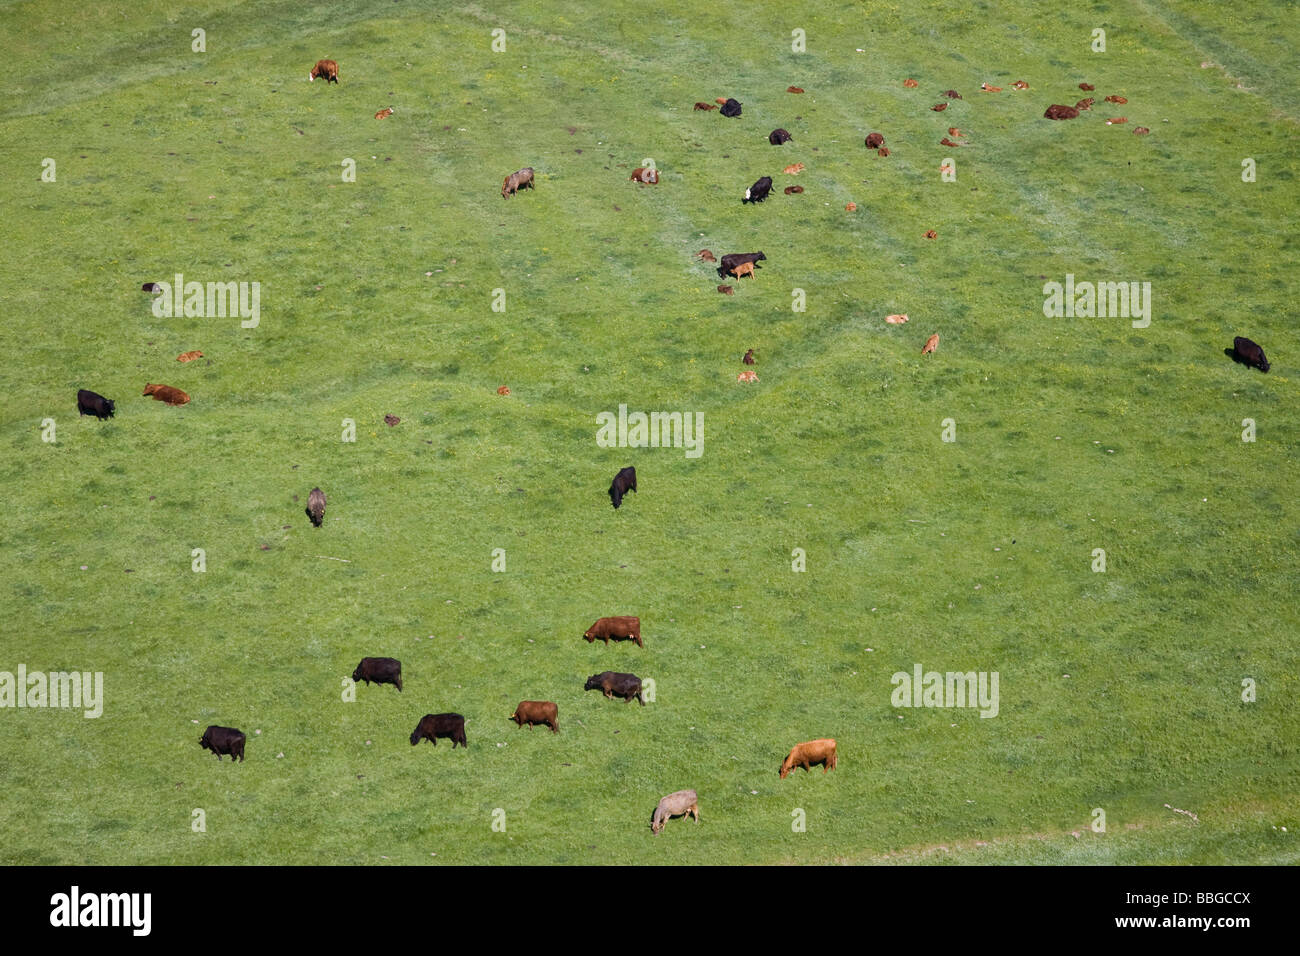 cows in a field Stock Photo